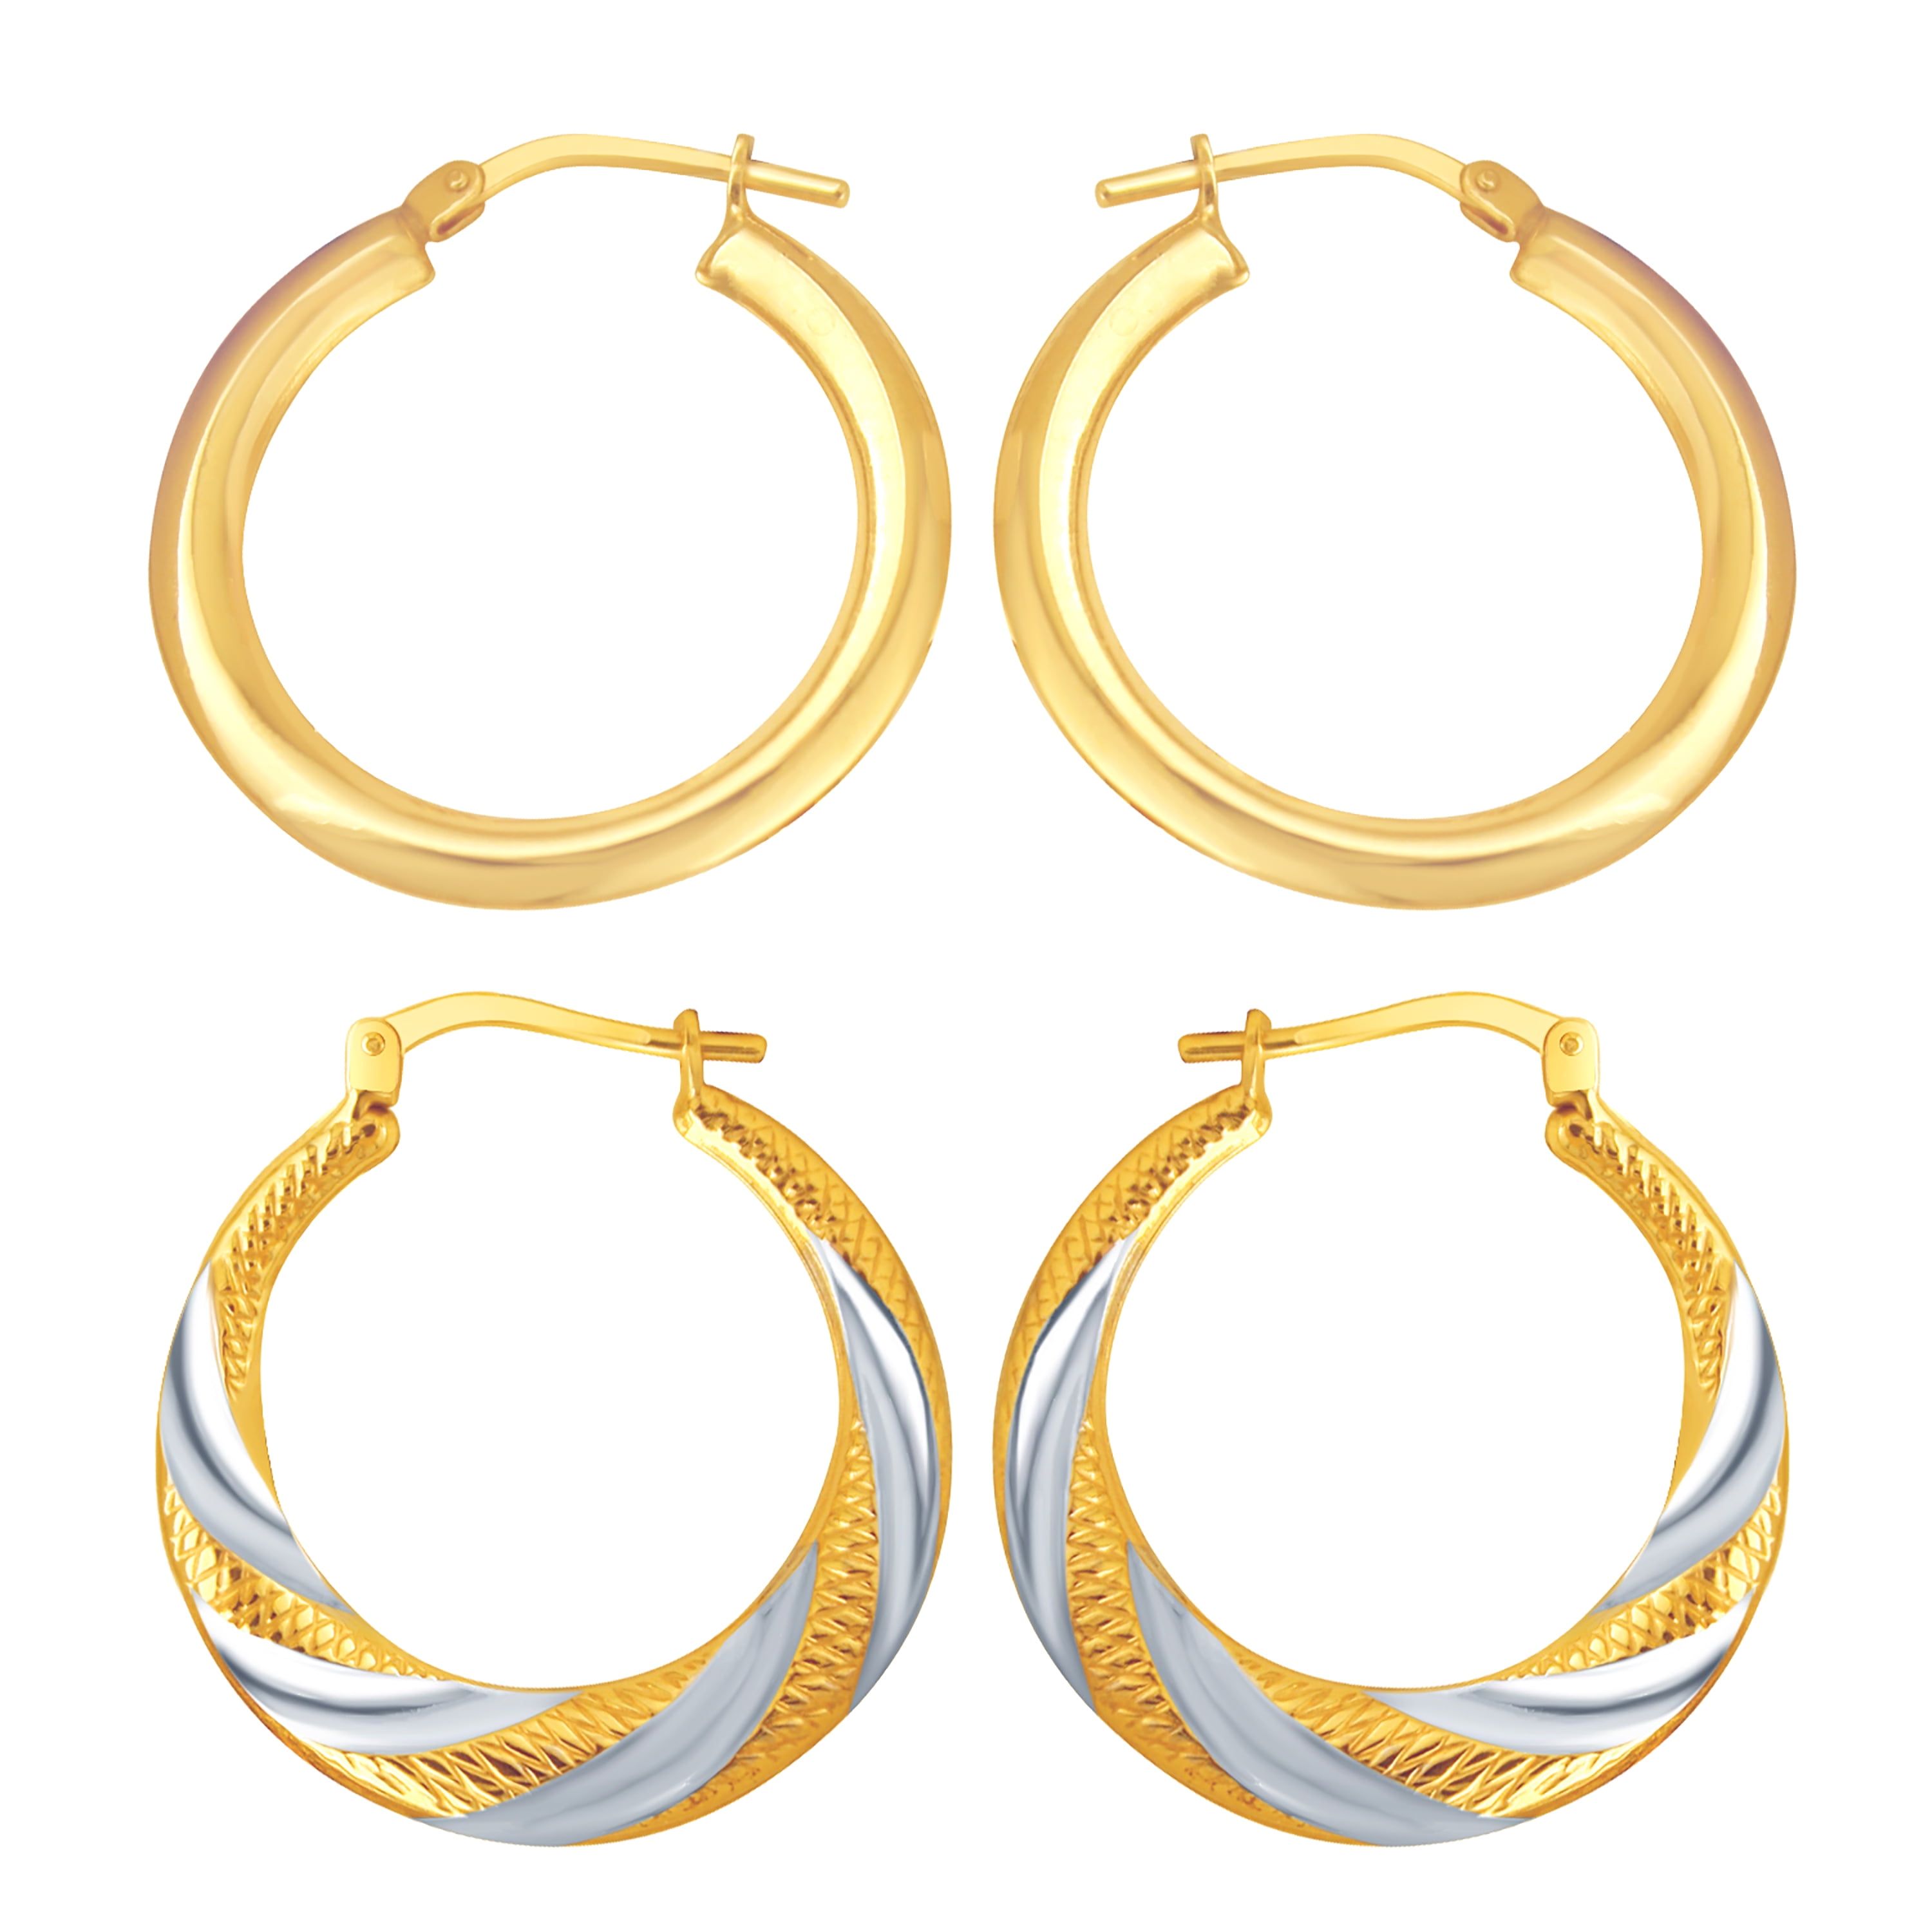 Brilliance Fine Jewelry Women's 14K Gold Plated Sterling Silver Glossy And 2Tone Twisted Hoops Adults Earrings Set